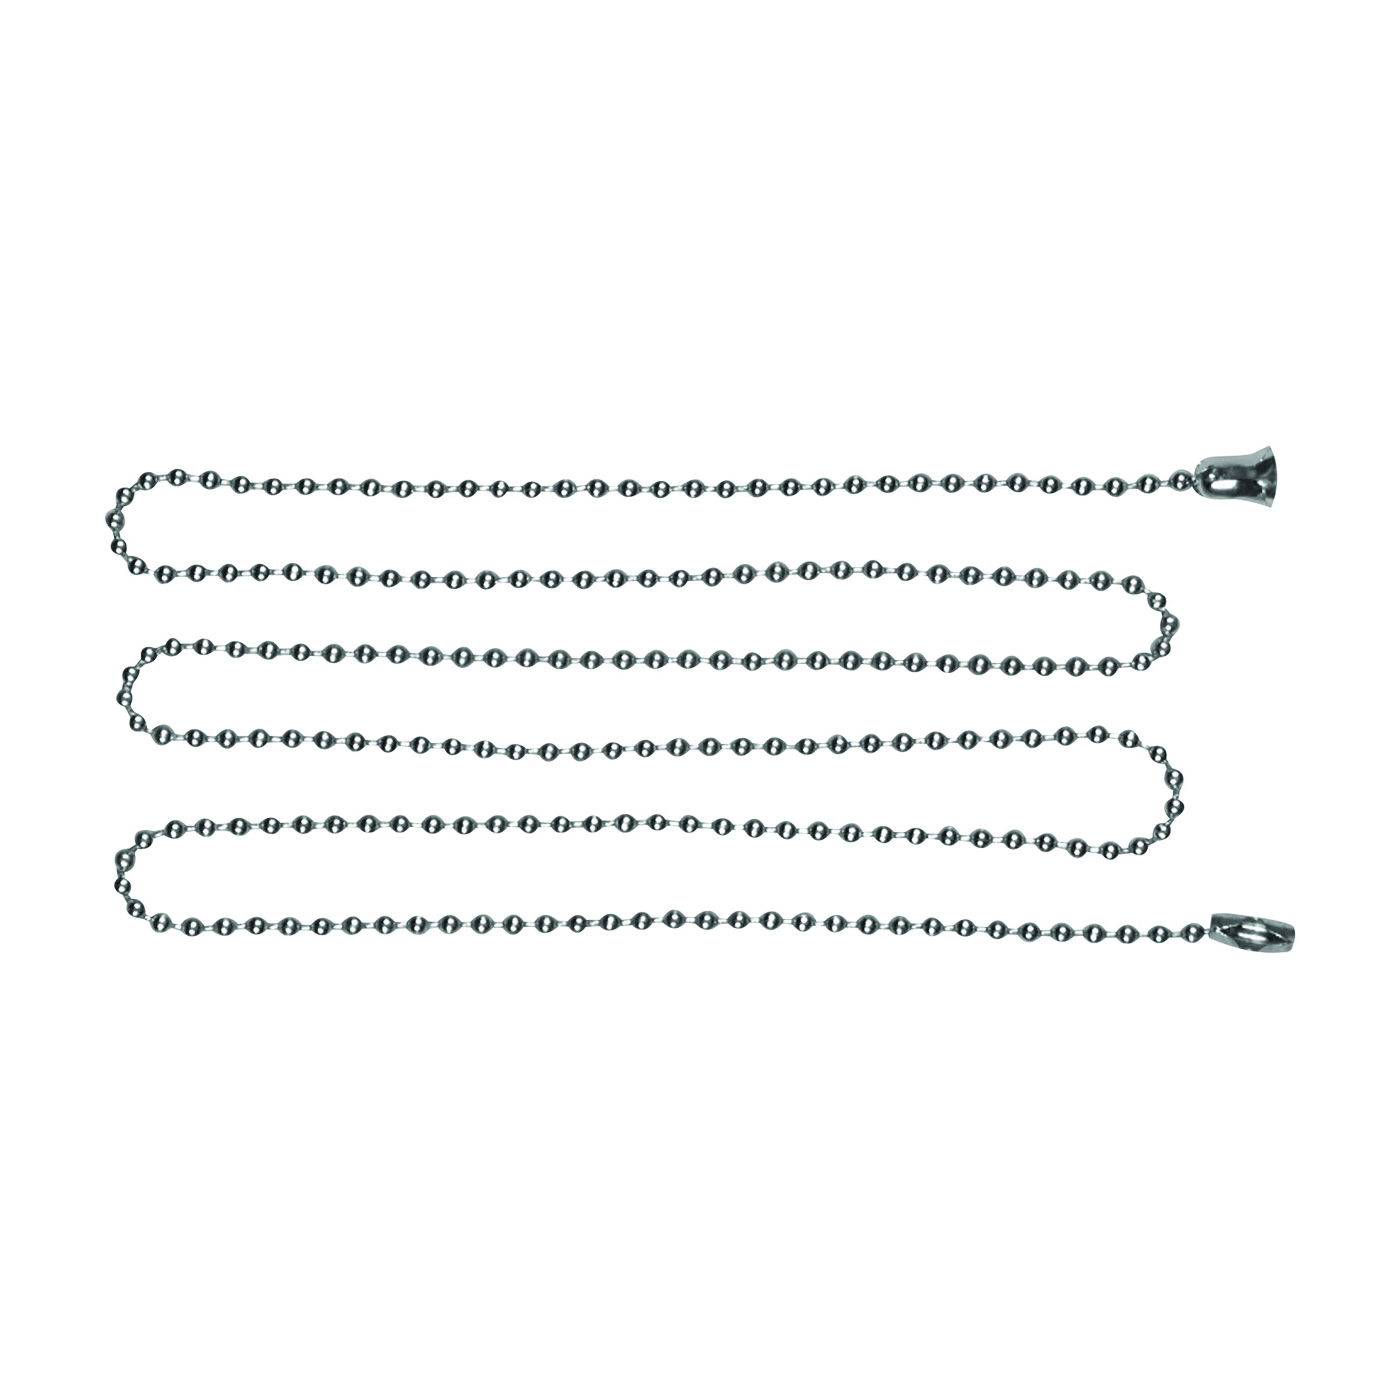 BP331NP Ball Chain with End Bell and Connector, #6 Chain, 3 ft L Chain, Steel, Nickel